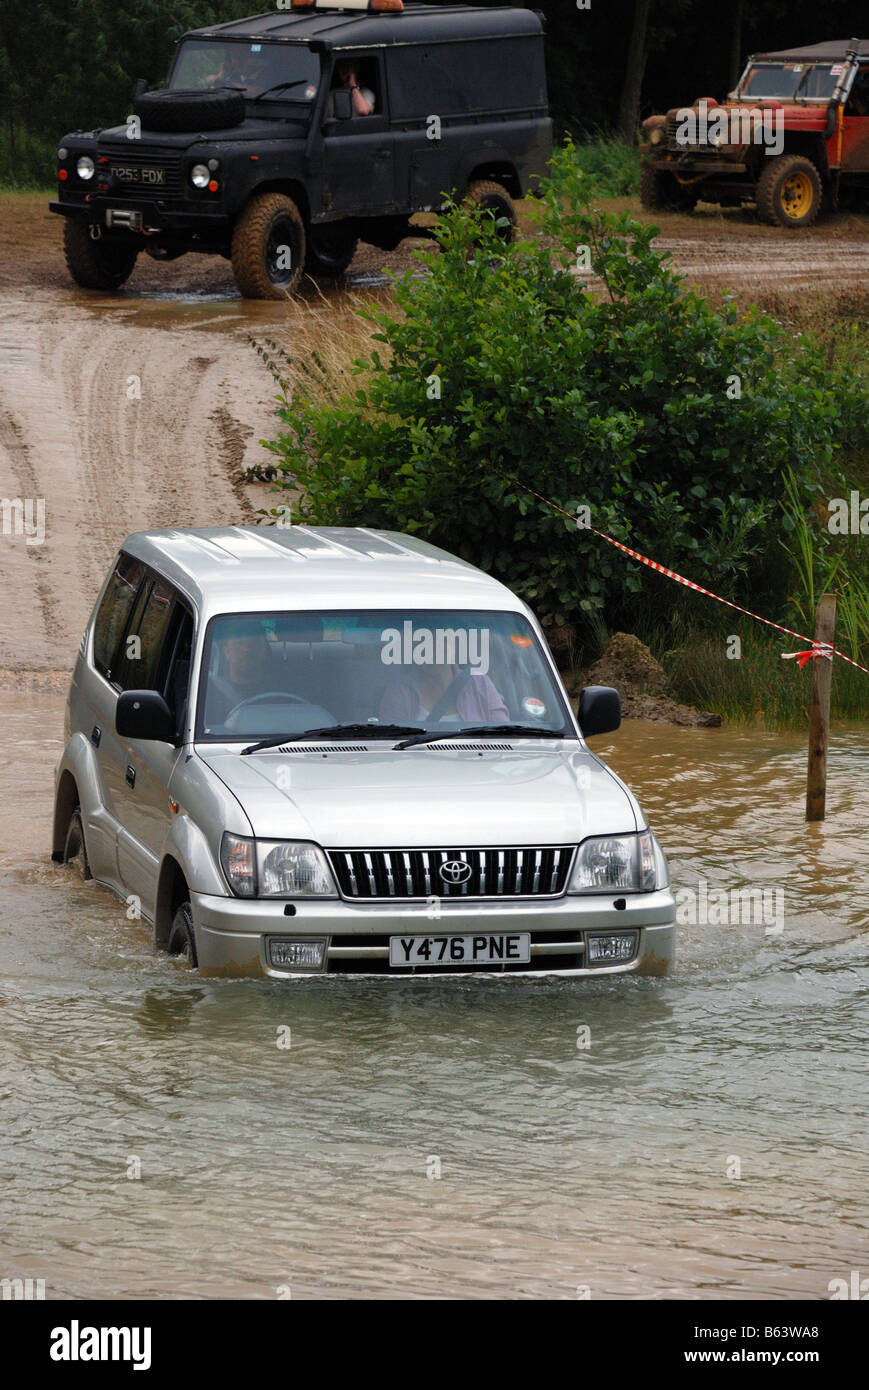 Toyota Colorado entering the water Registration number Y476 PNE 4WD four wheel drive LRM Show Billing 2008 Land Rover Monthly Stock Photo